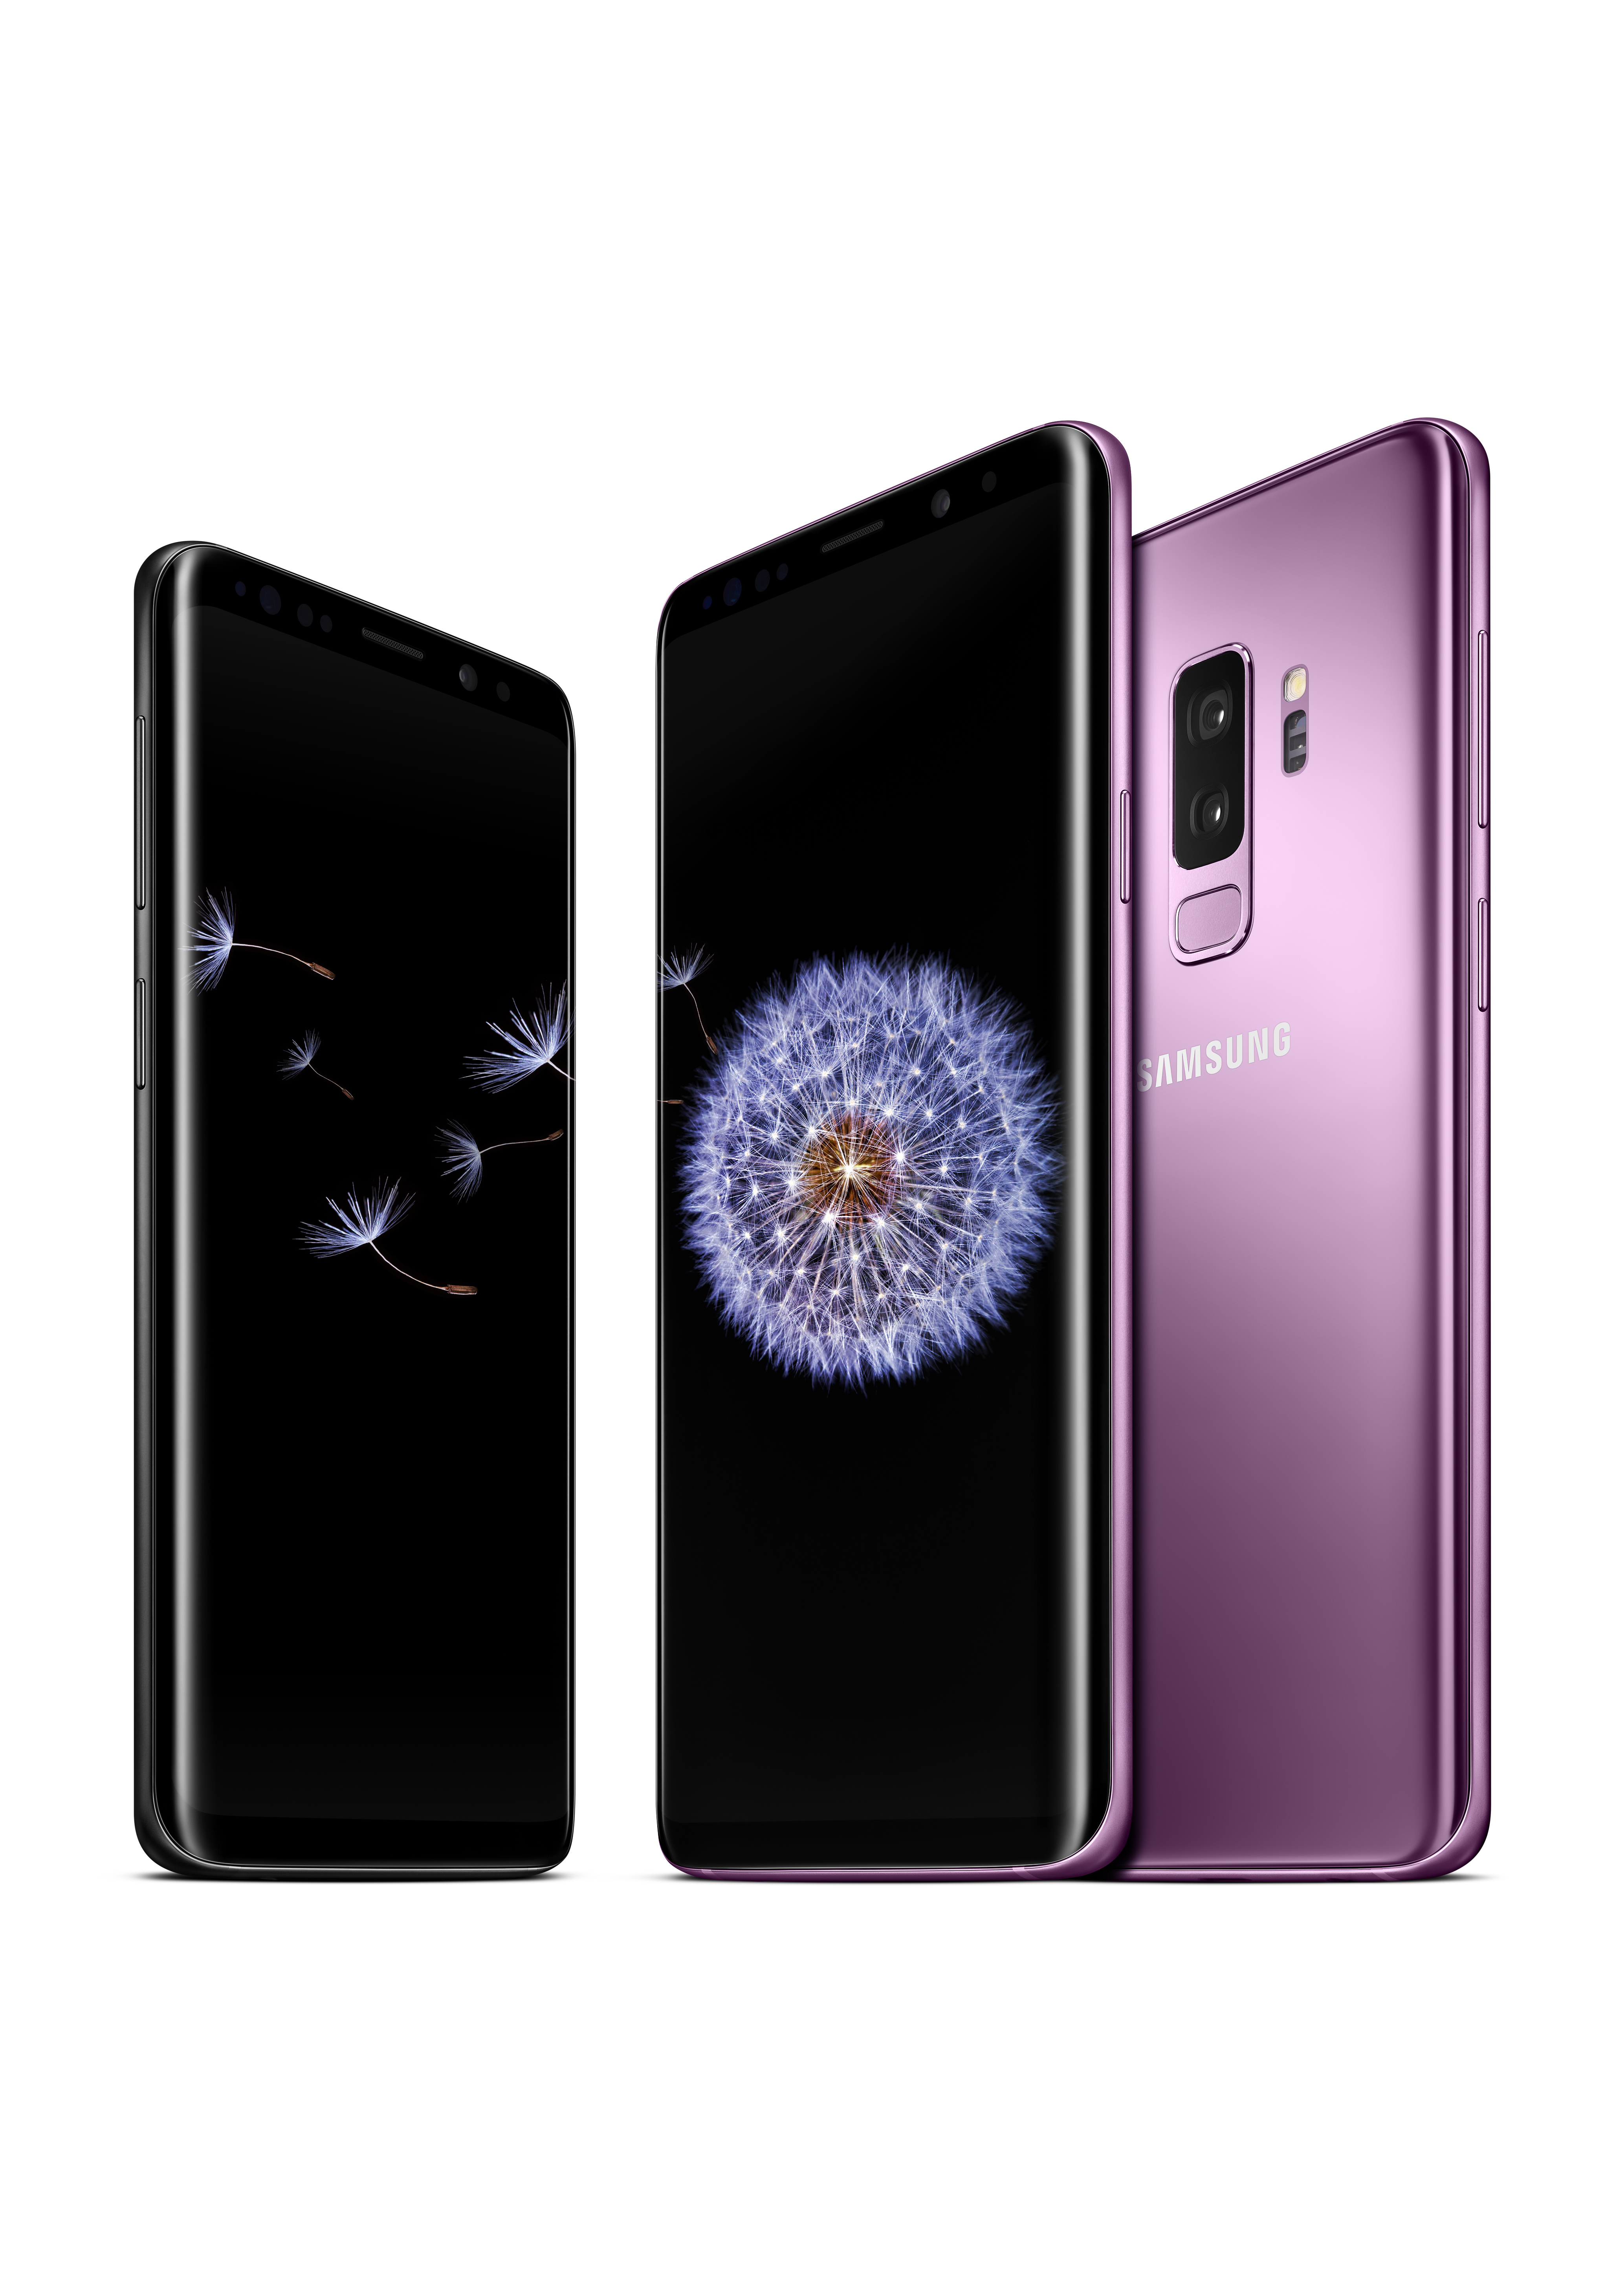 Built for the Way We Communicate Today: Samsung Galaxy S9 and S9+ ...